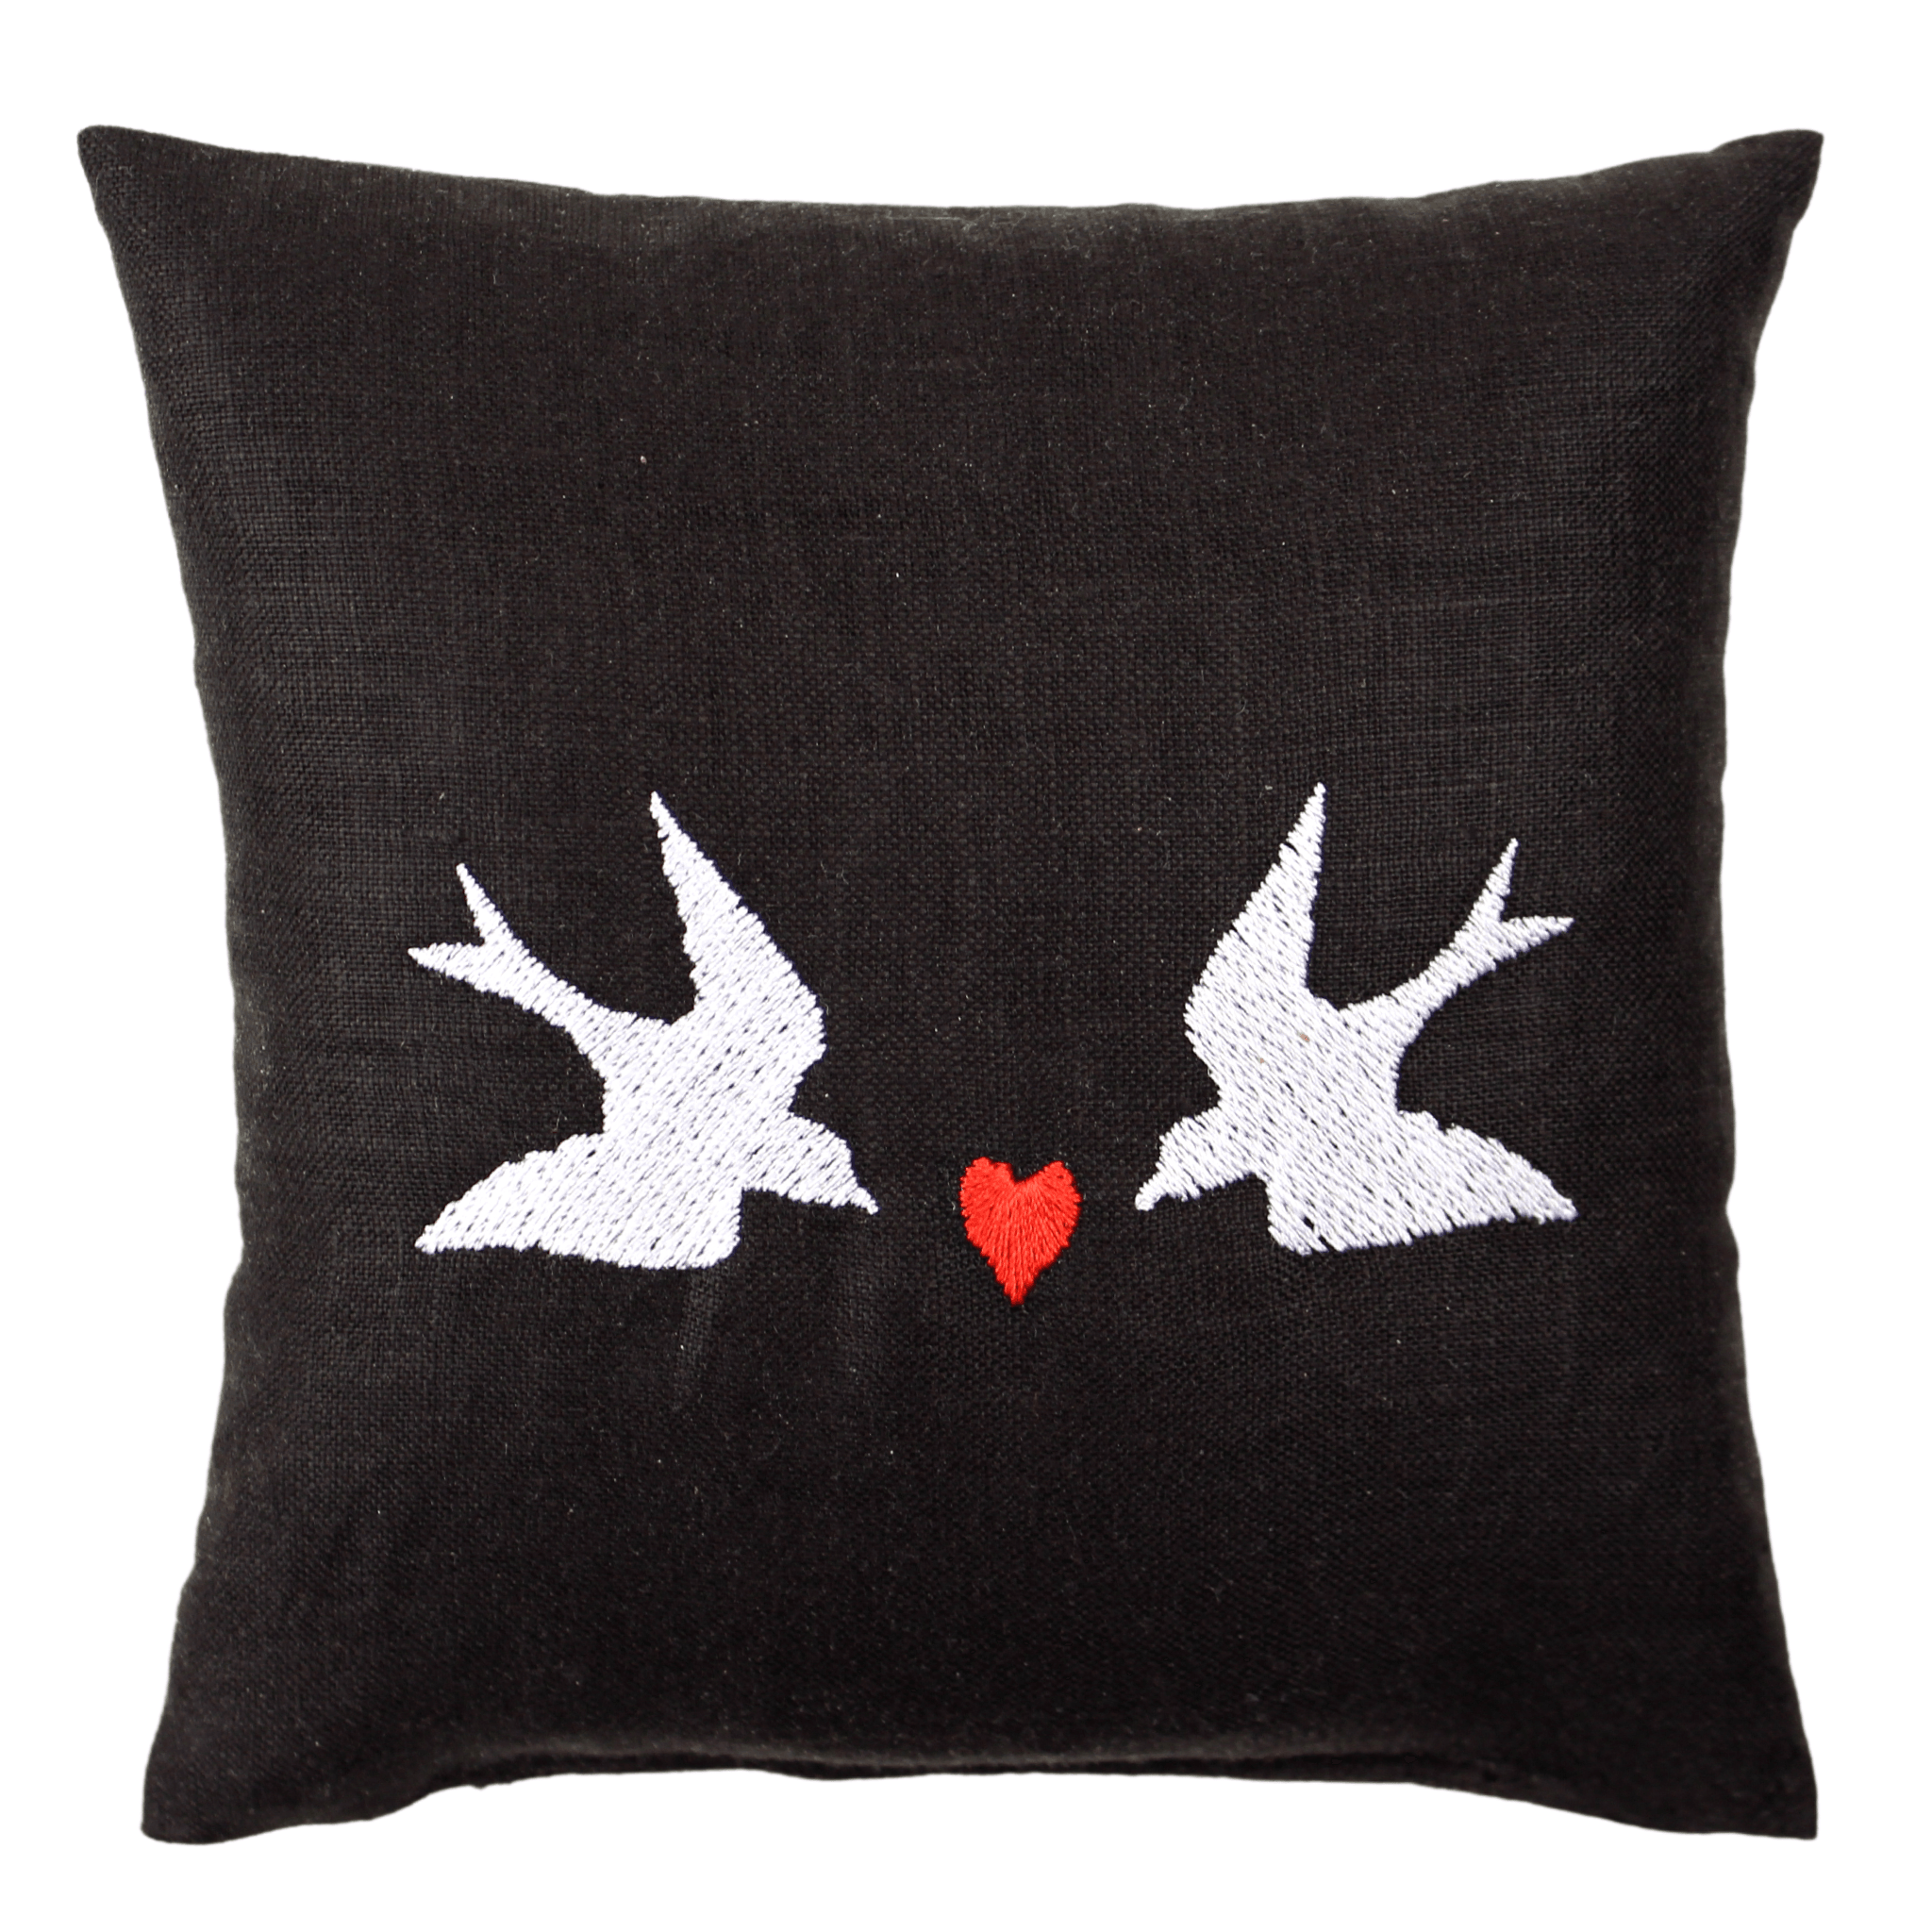 Embroidered Love Birds Lavender Sachet - Lavender By The Bay